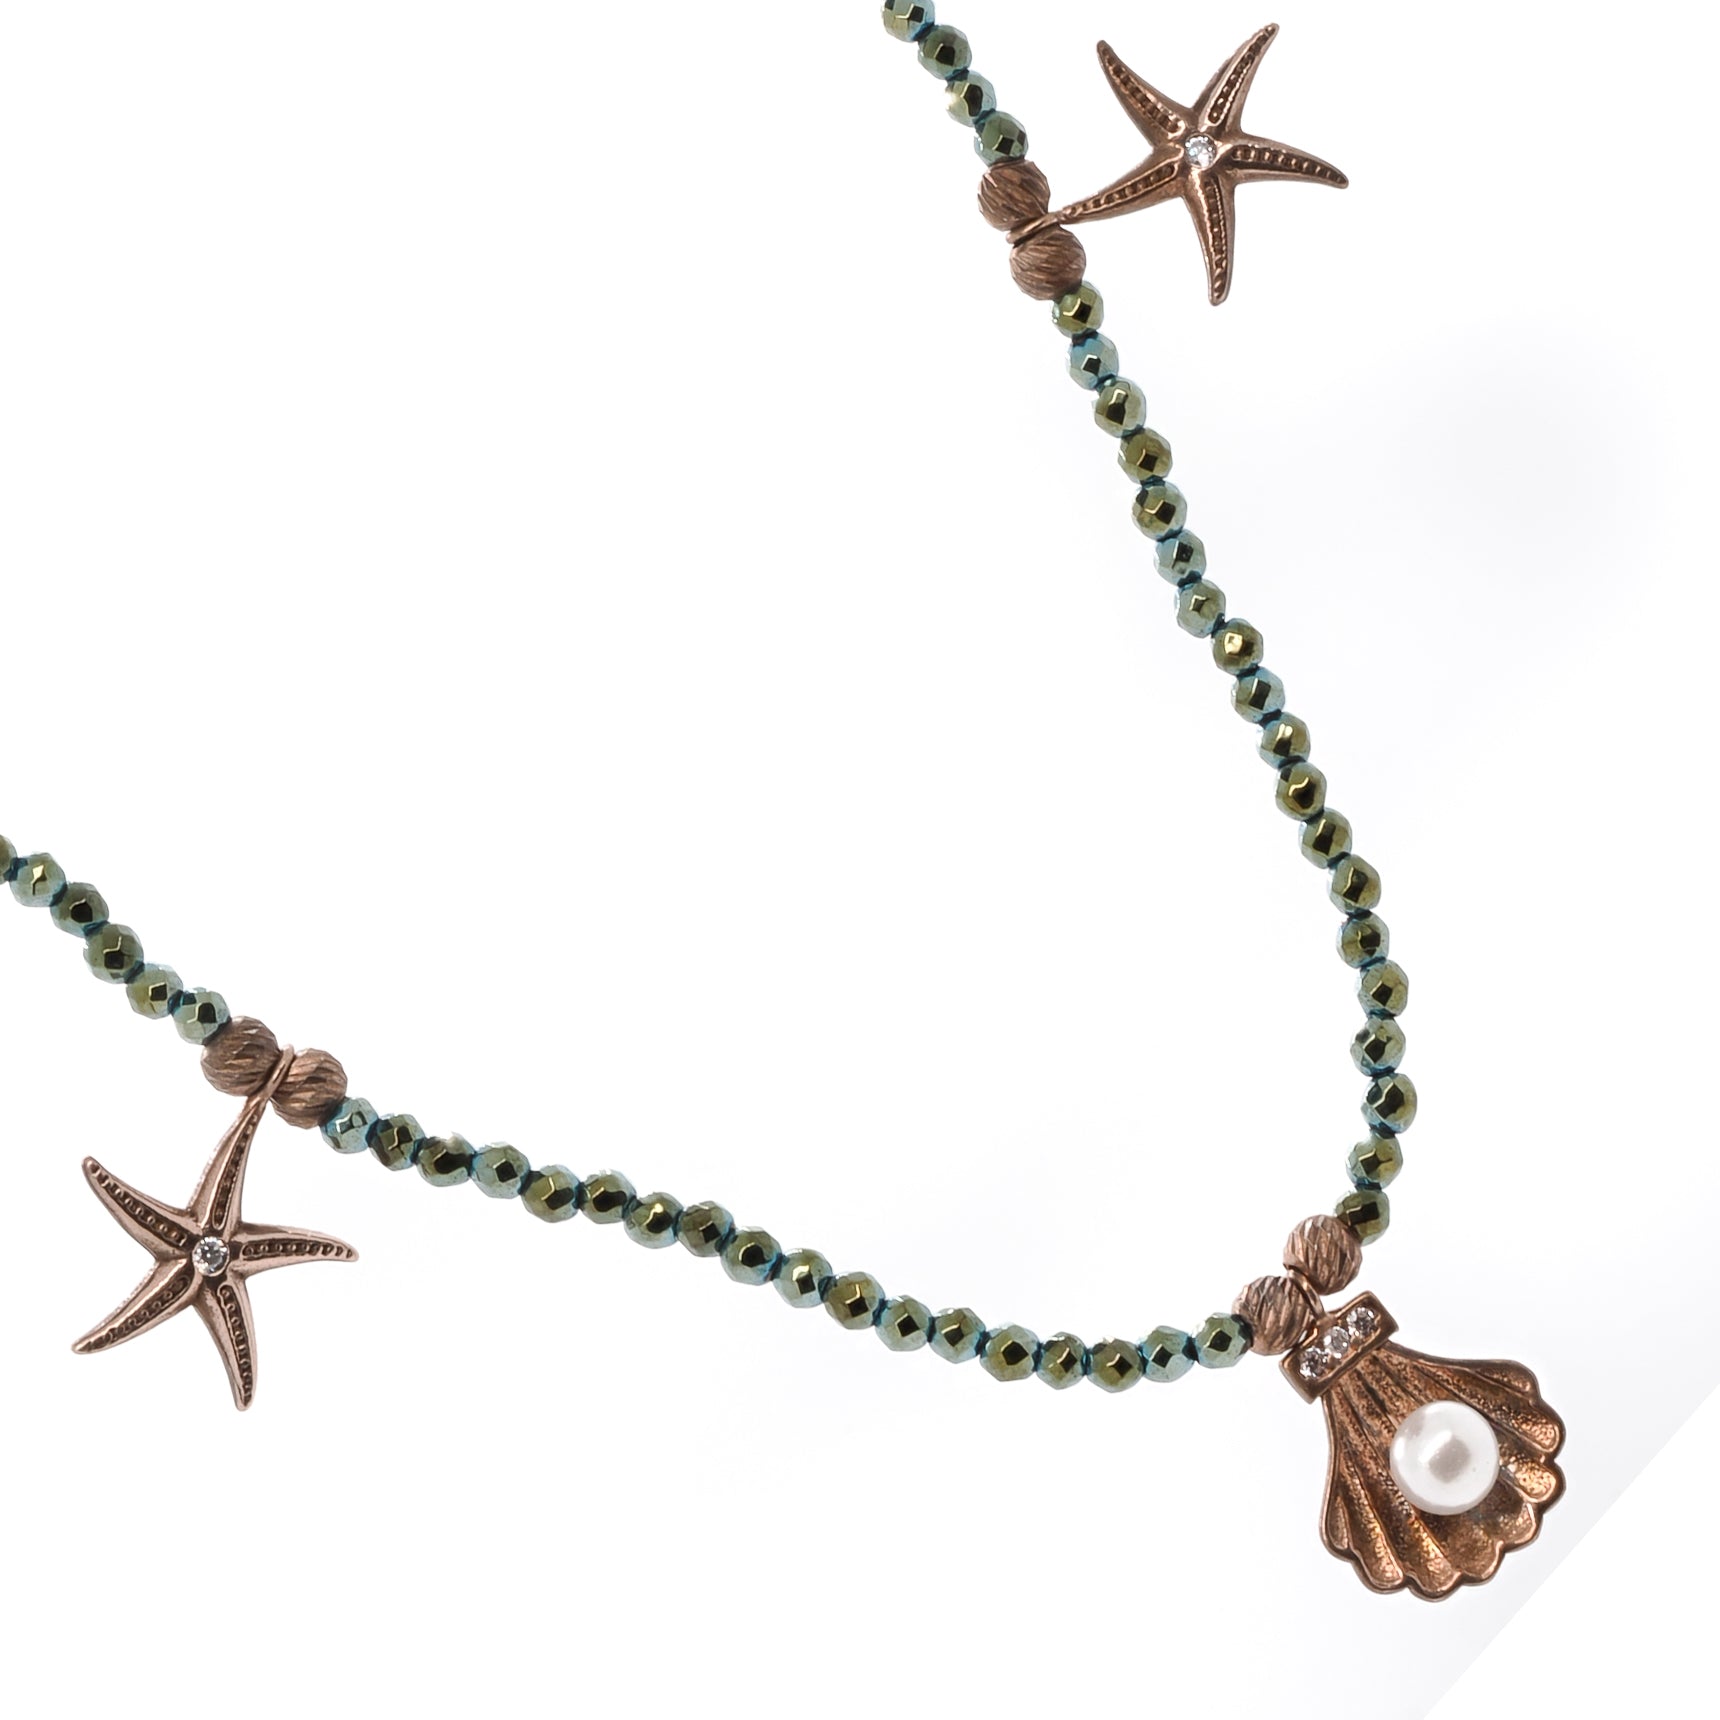 Bring a touch of the ocean with you wherever you go with the Beach Day Necklace